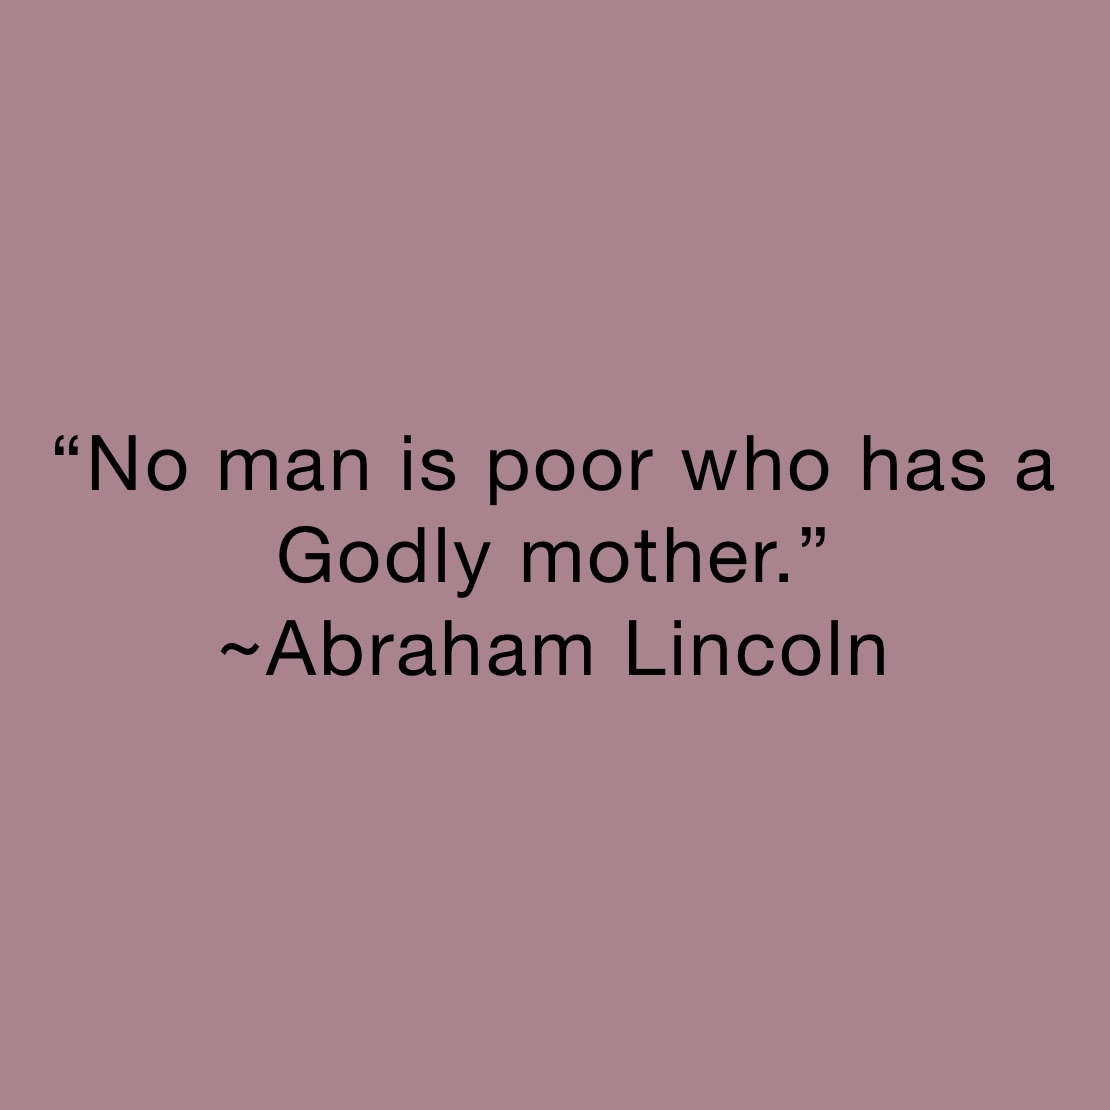 “No man is poor who has a Godly mother.”
~Abraham Lincoln